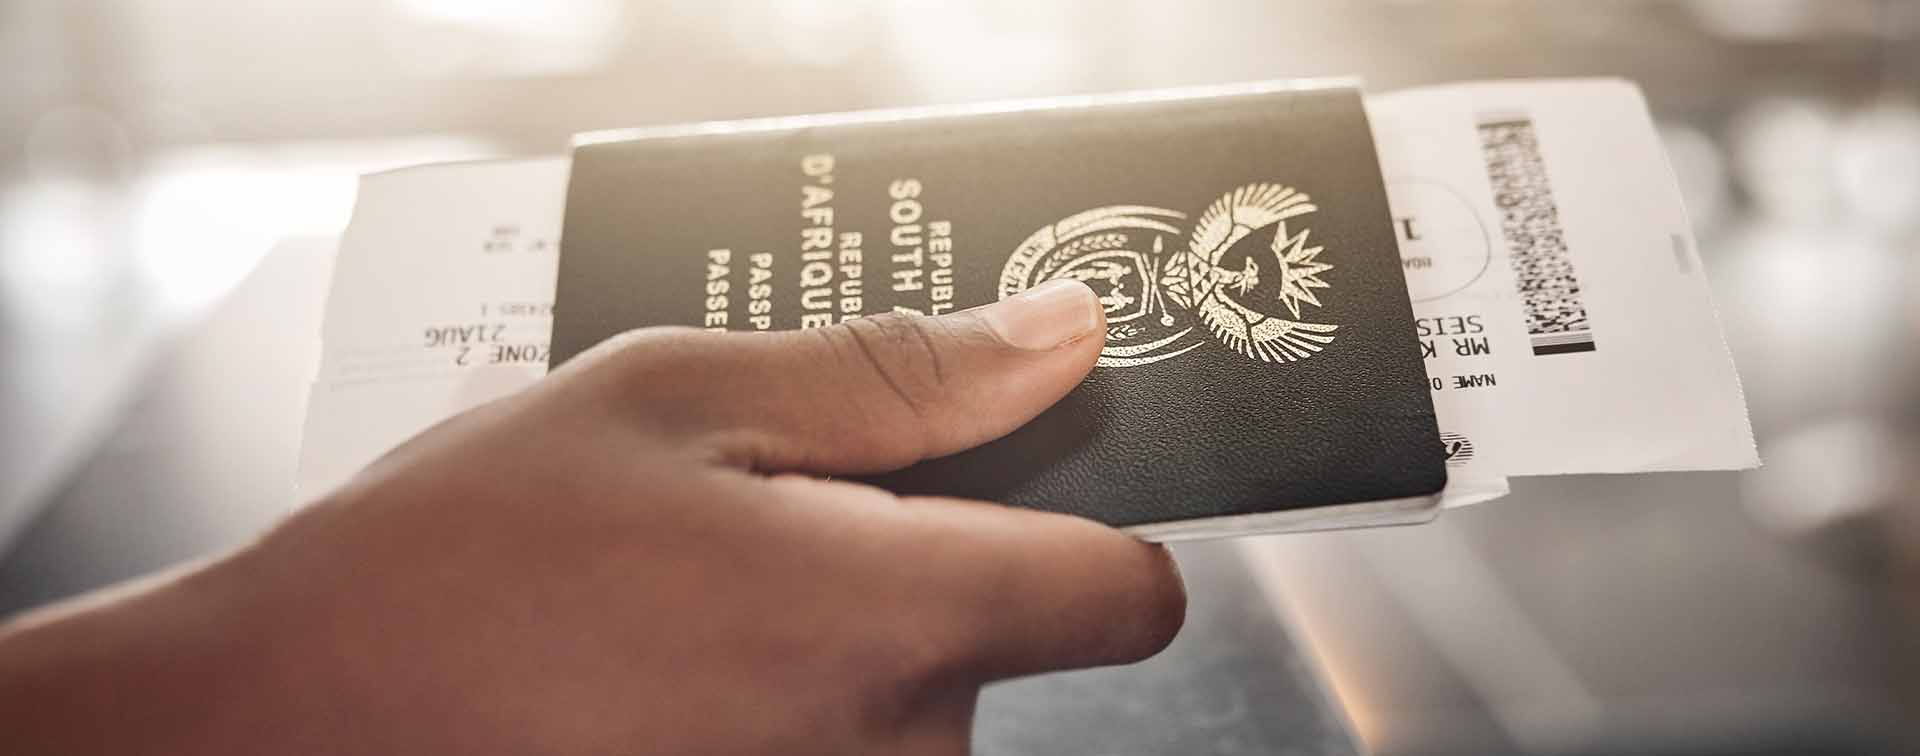 South African passport containing flight ticket held in hand